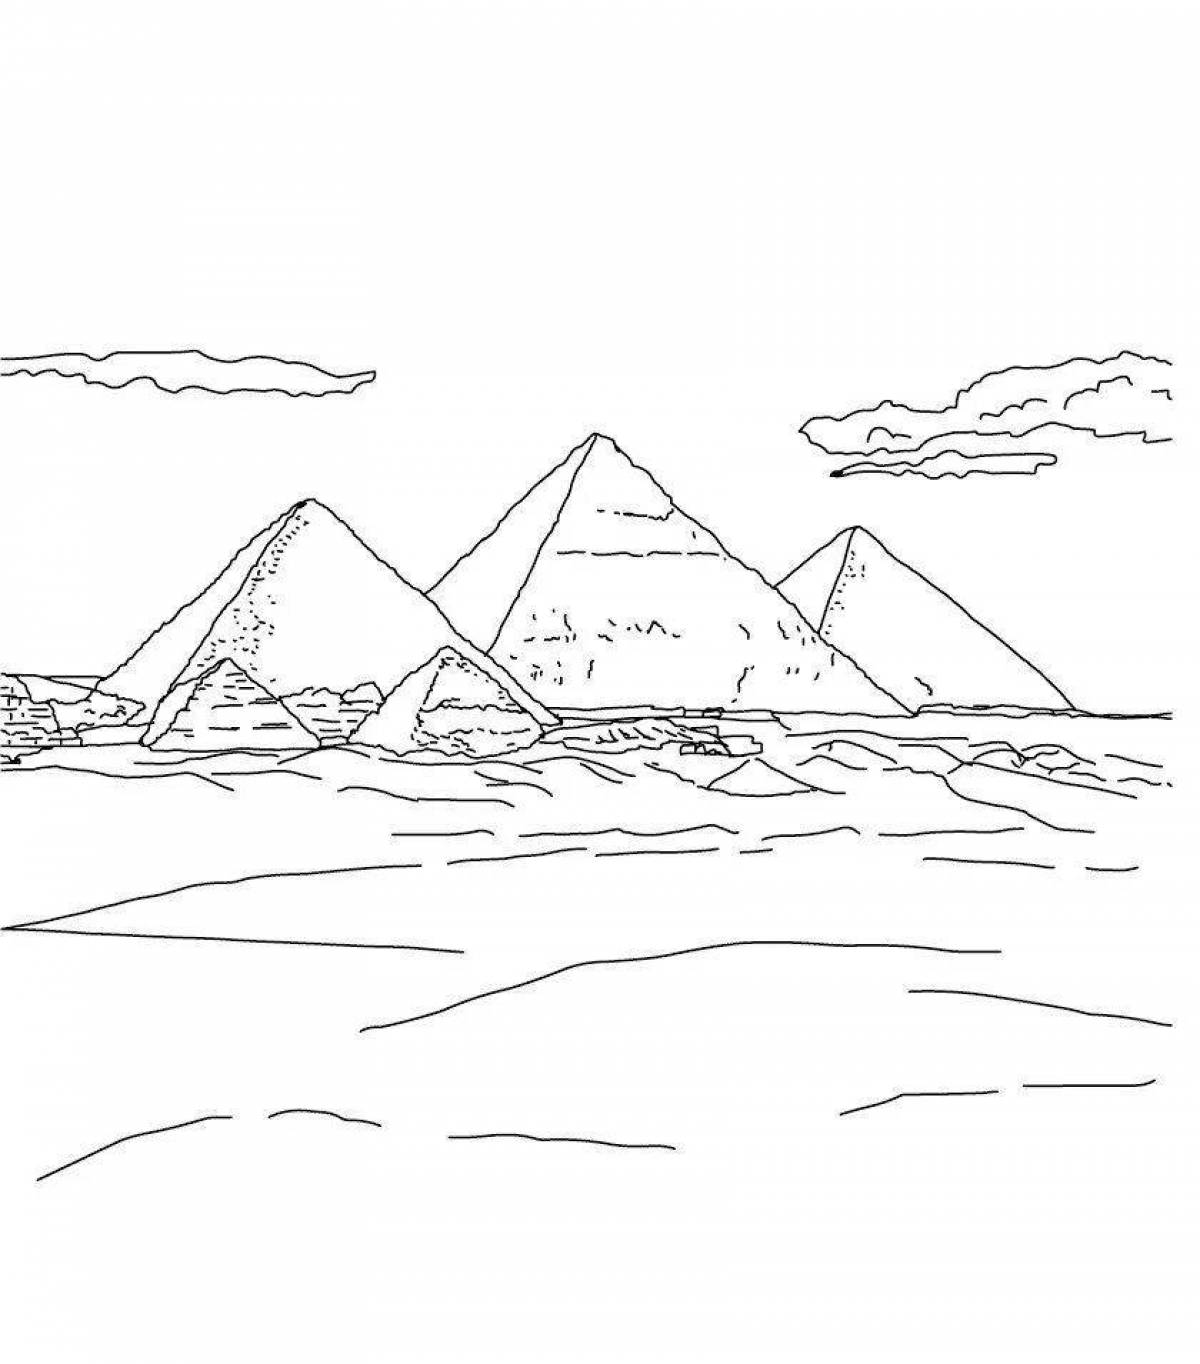 Coloring book of luxurious Egyptian pyramids